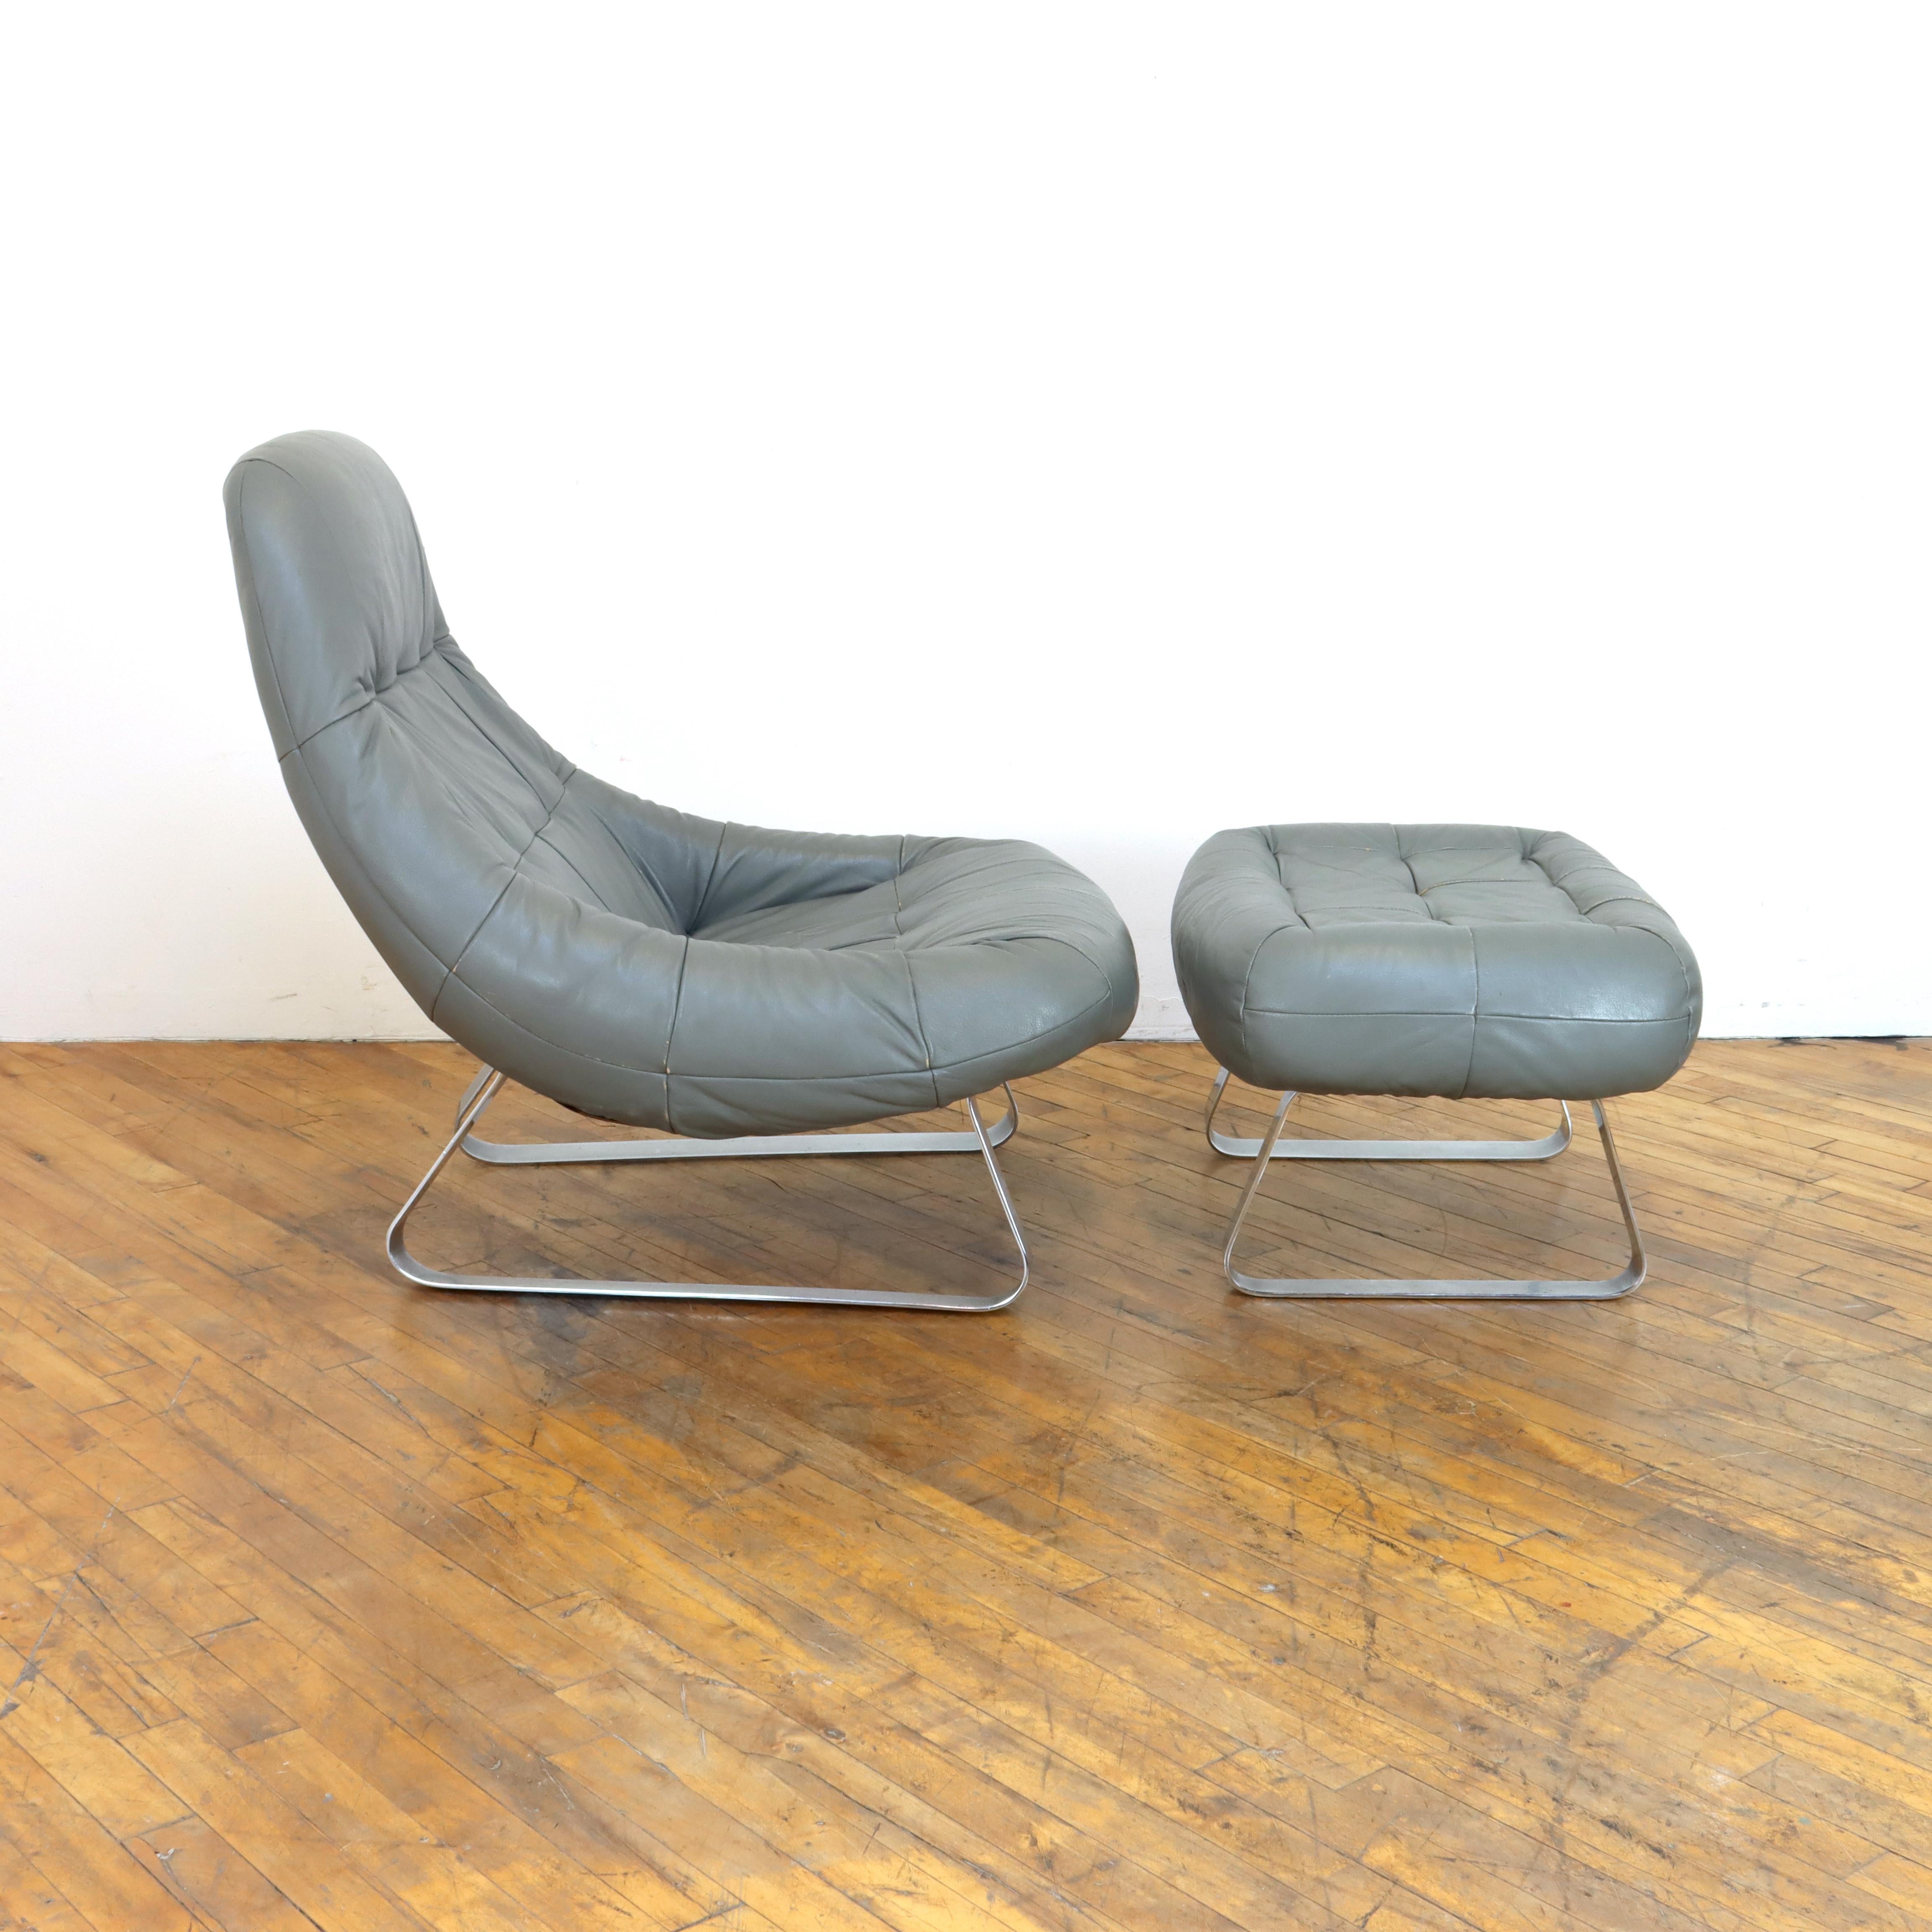 Lay back in this spaceship of a chair.  1970s Hippie futurist lounge chair and ottoman designed by Brazilian designer Percival Lafer.  Lafer is one of the most recognized Brazilian designers of his generation.  This set features an unusual grey